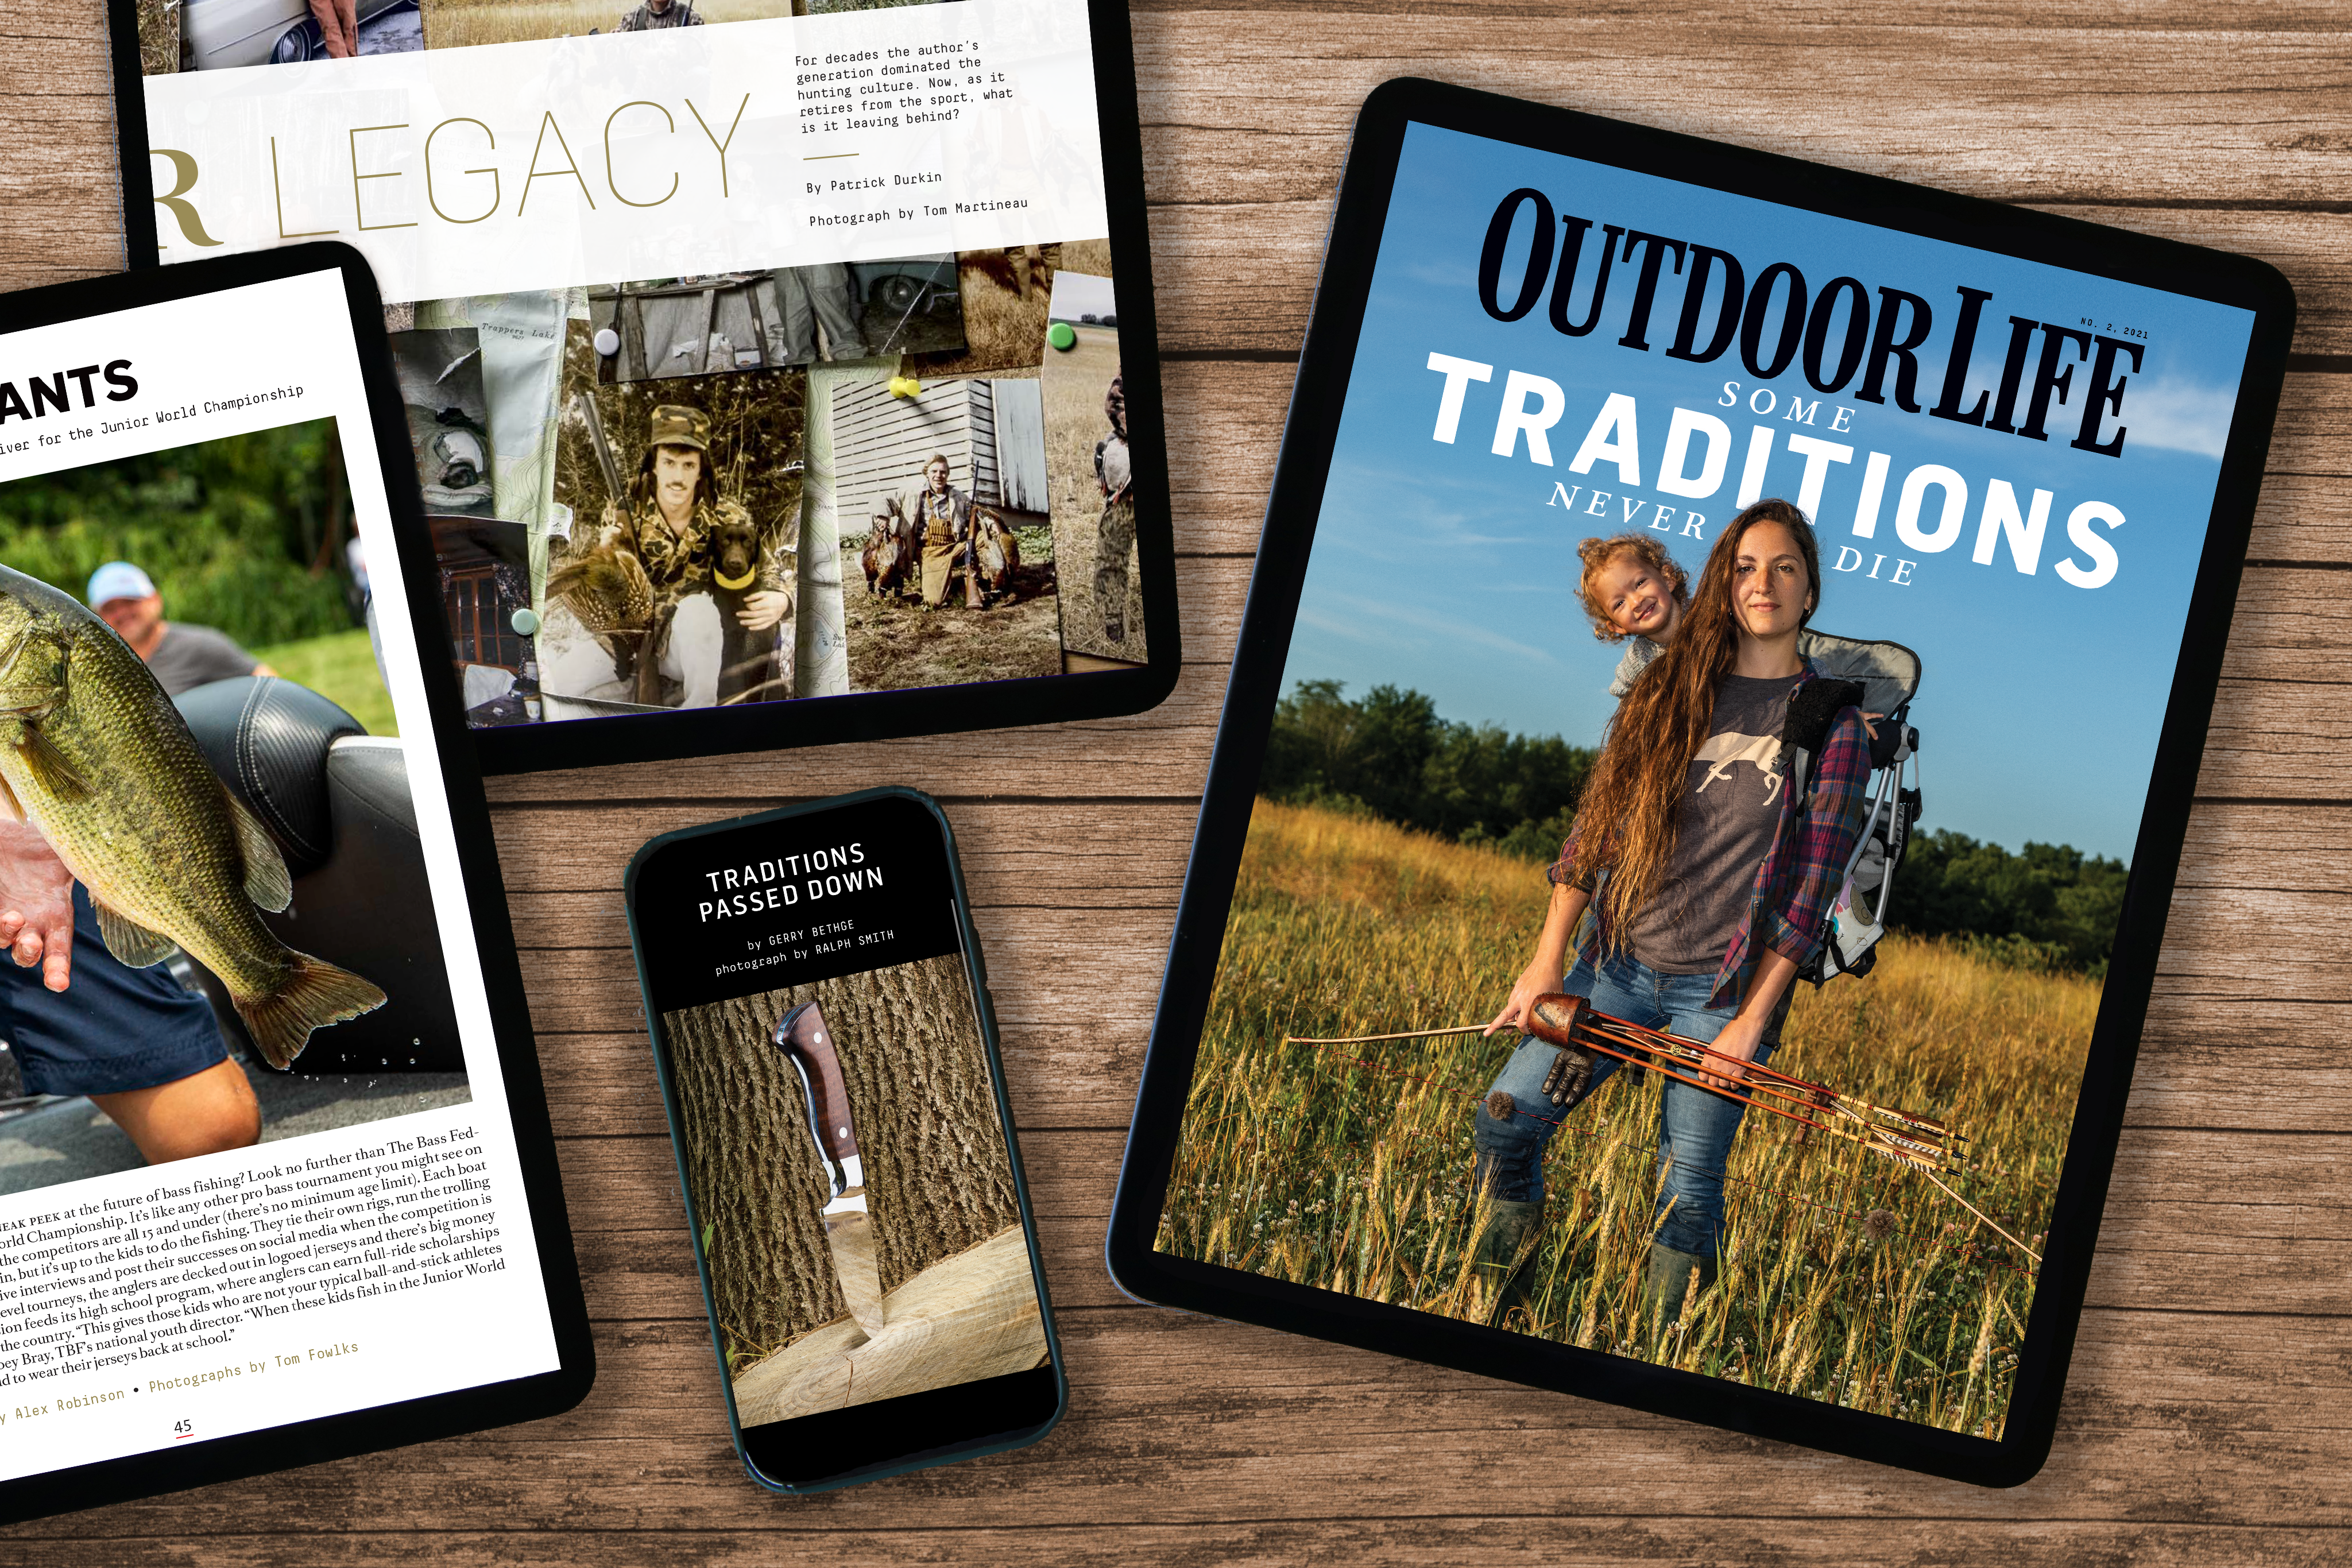 The new traditions issue of outdoor life magazine.